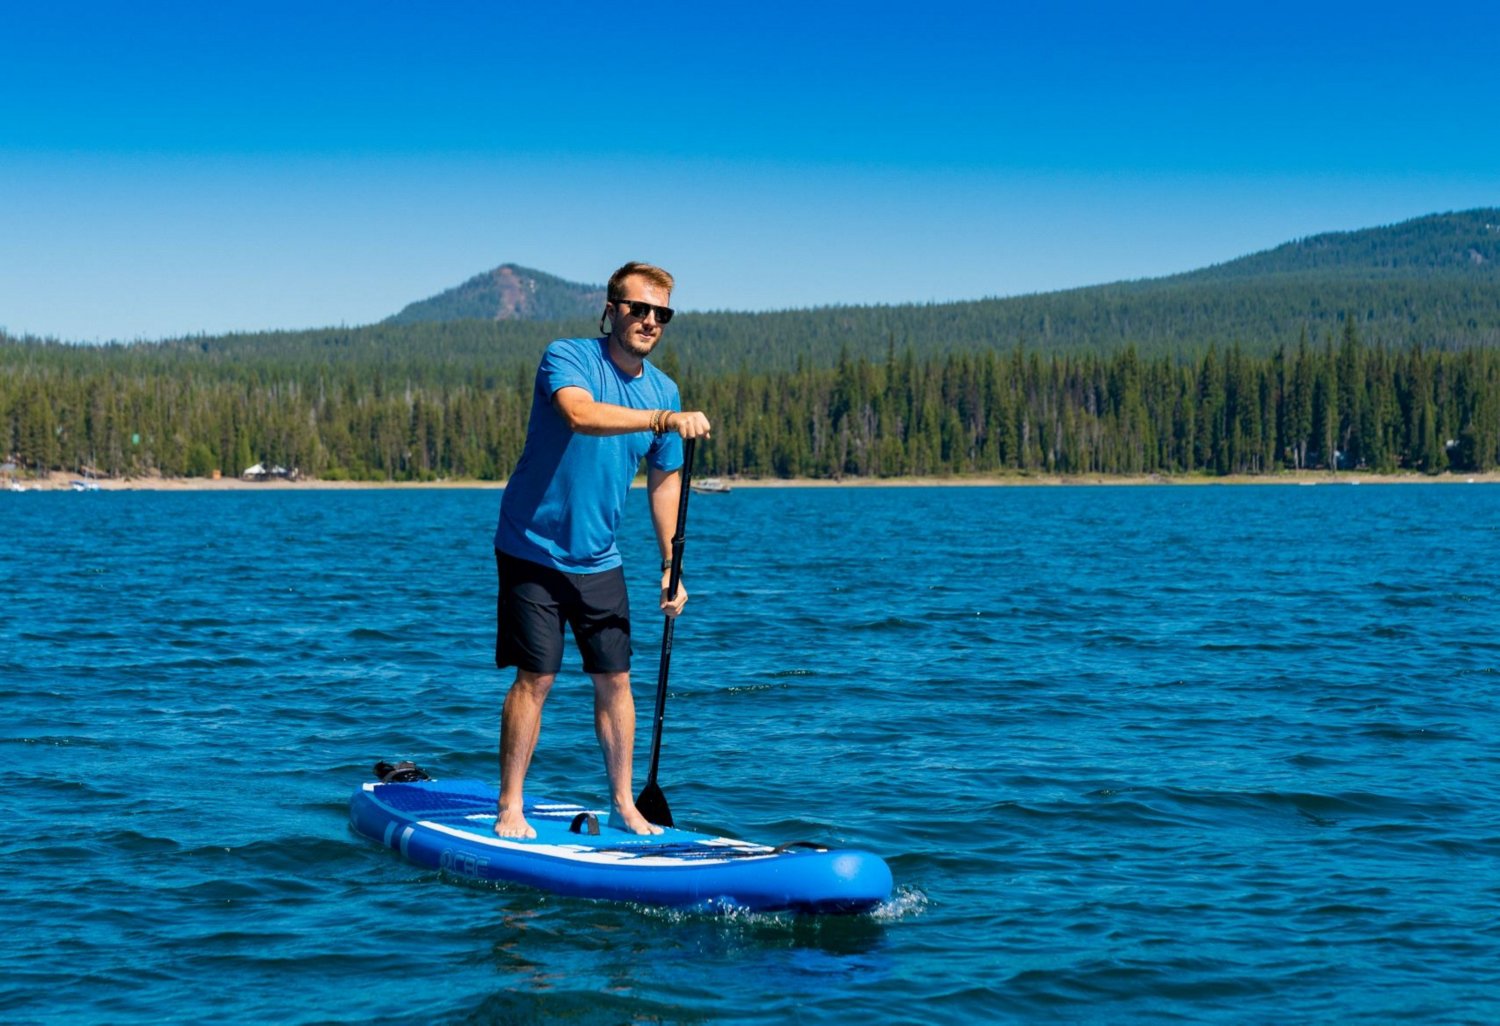 California Board Company Viking 11 ft Inflatable Stand Up Paddleboard ...